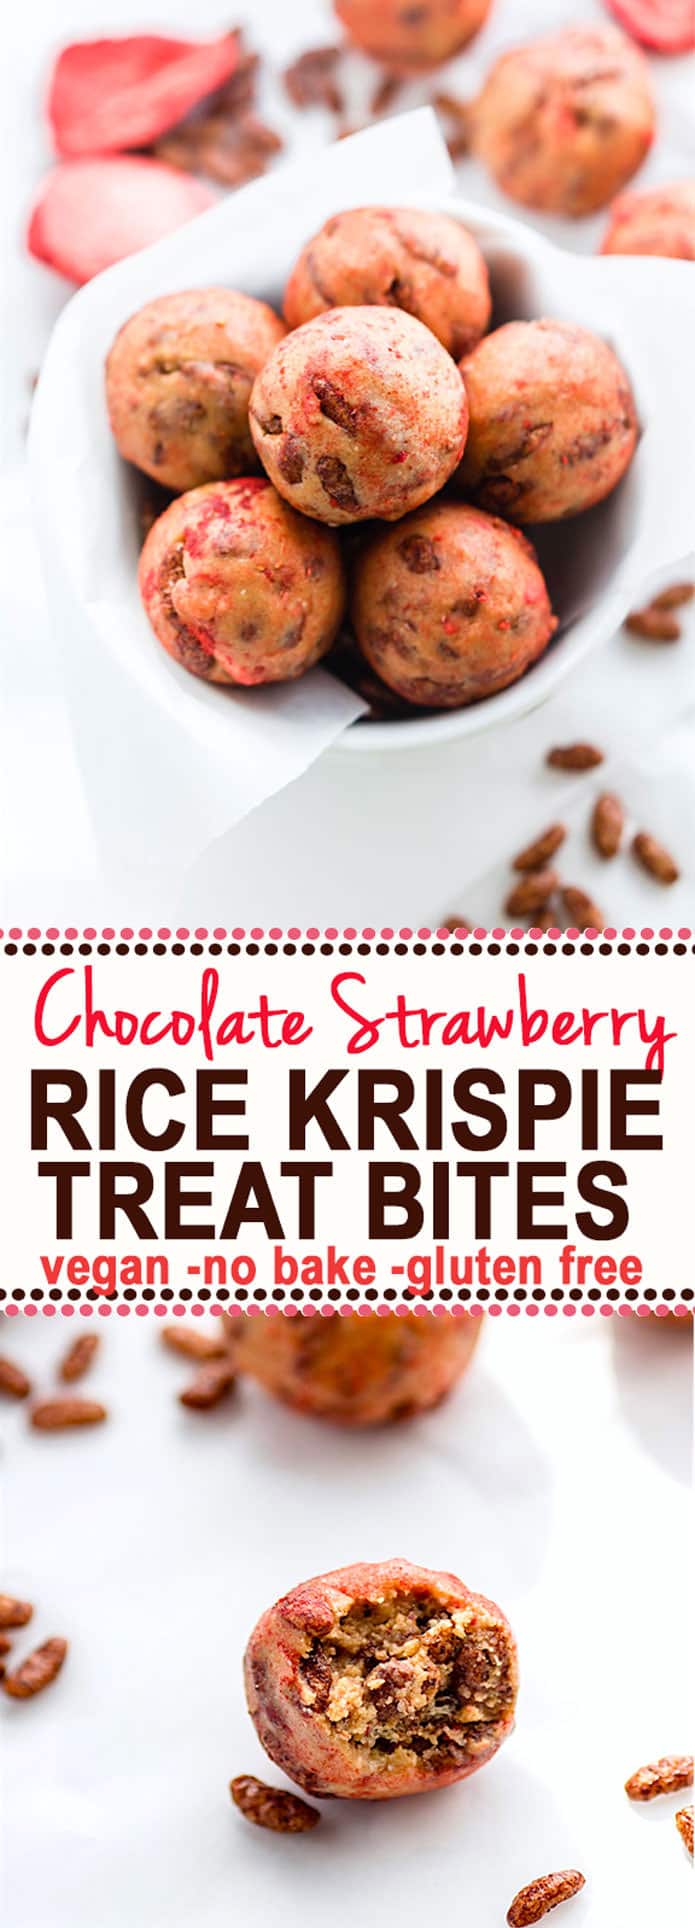 Super Tasty Chocolate Strawberry NO BAKE rice Krispie Treats BITES! Vegan Gluten Free Rice Krispie treats in BITE form and actually healthy for you. Easy to make and a great snack or breakfast bite for kids and adults! @cottercrunch